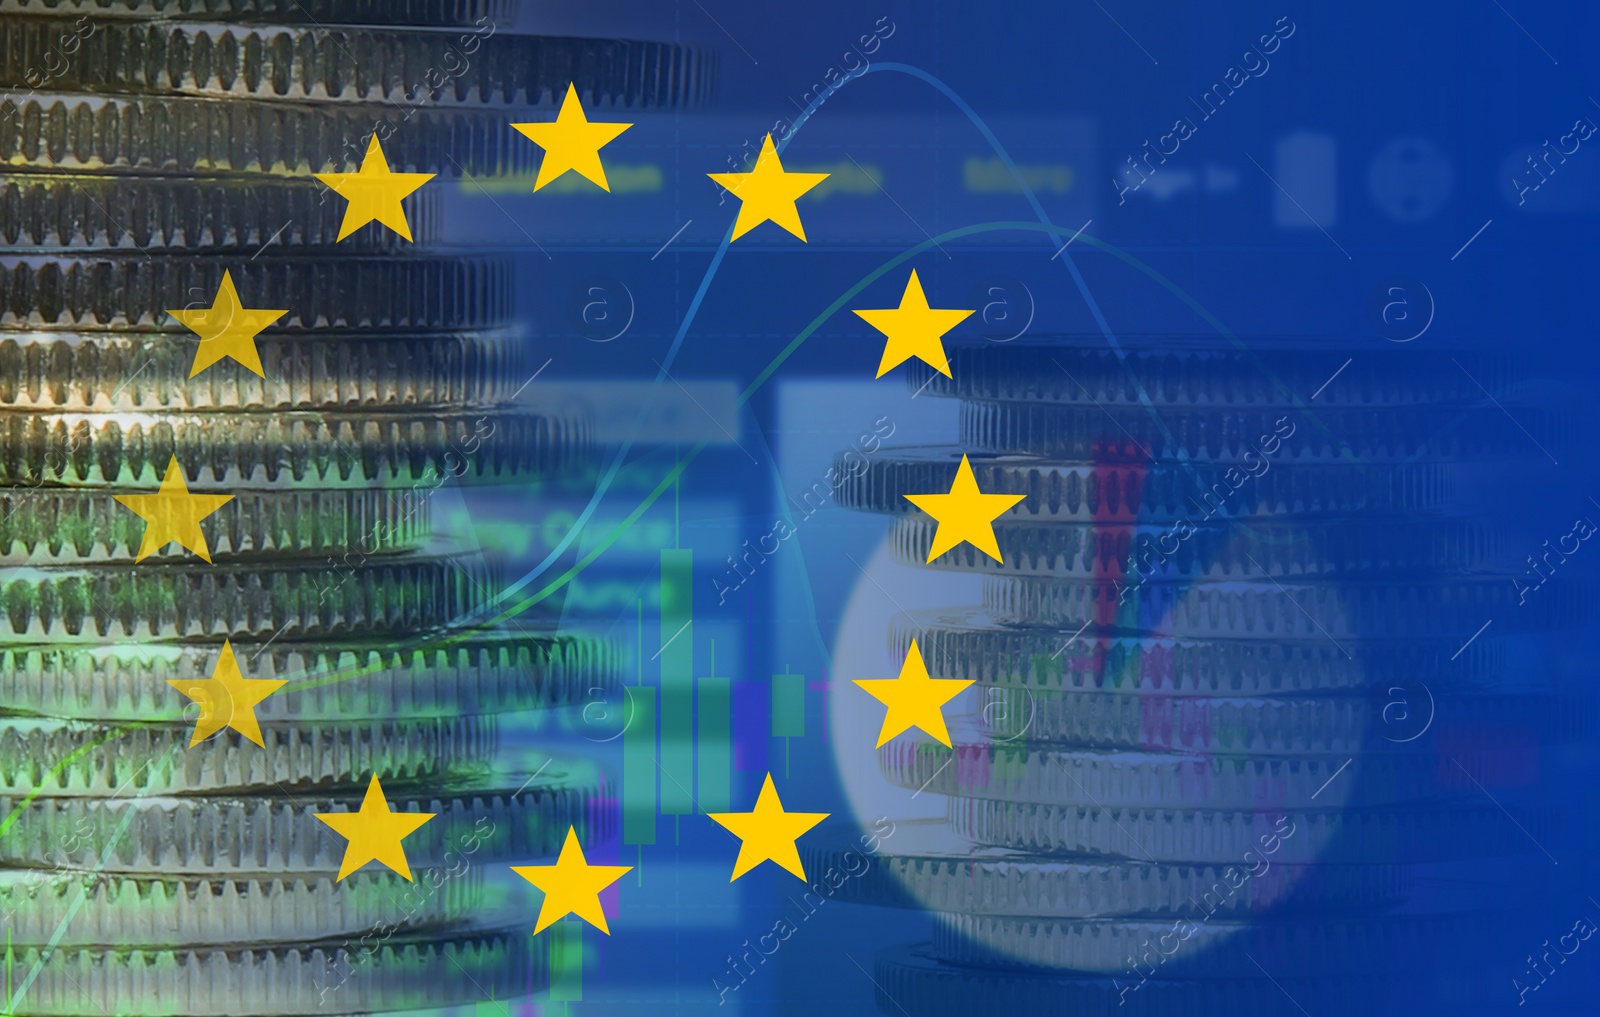 Image of Stock exchange. Multiple exposure with European flag, coins, trading data and graphs